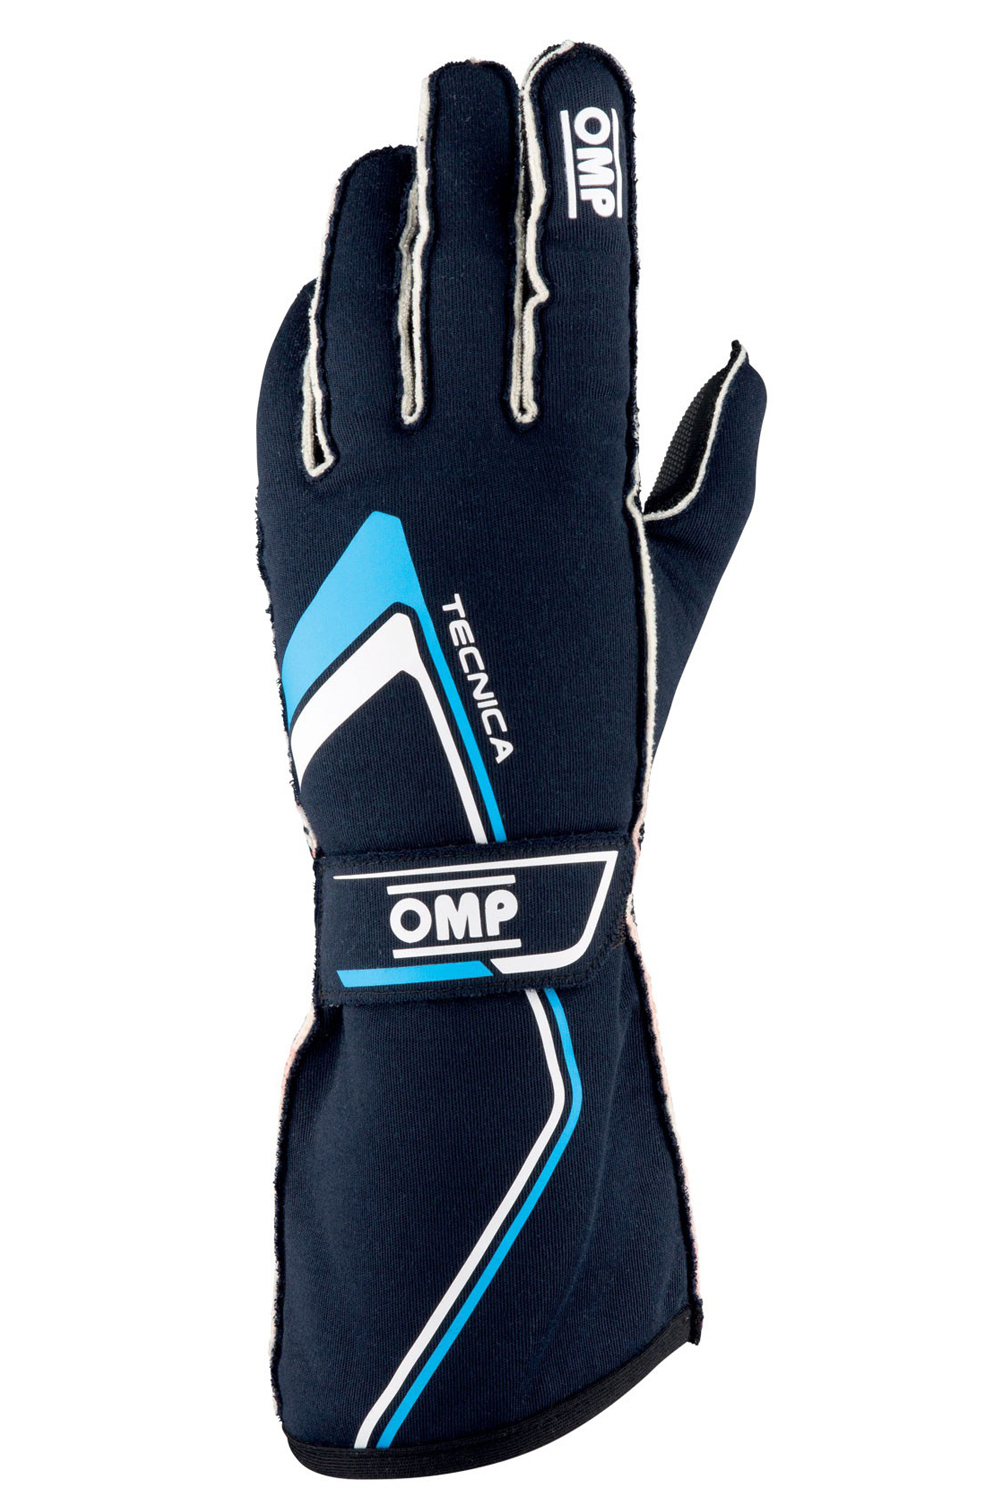 OMP Racing IB772BCS - TECNICA Gloves Blue And Cyan Size Small